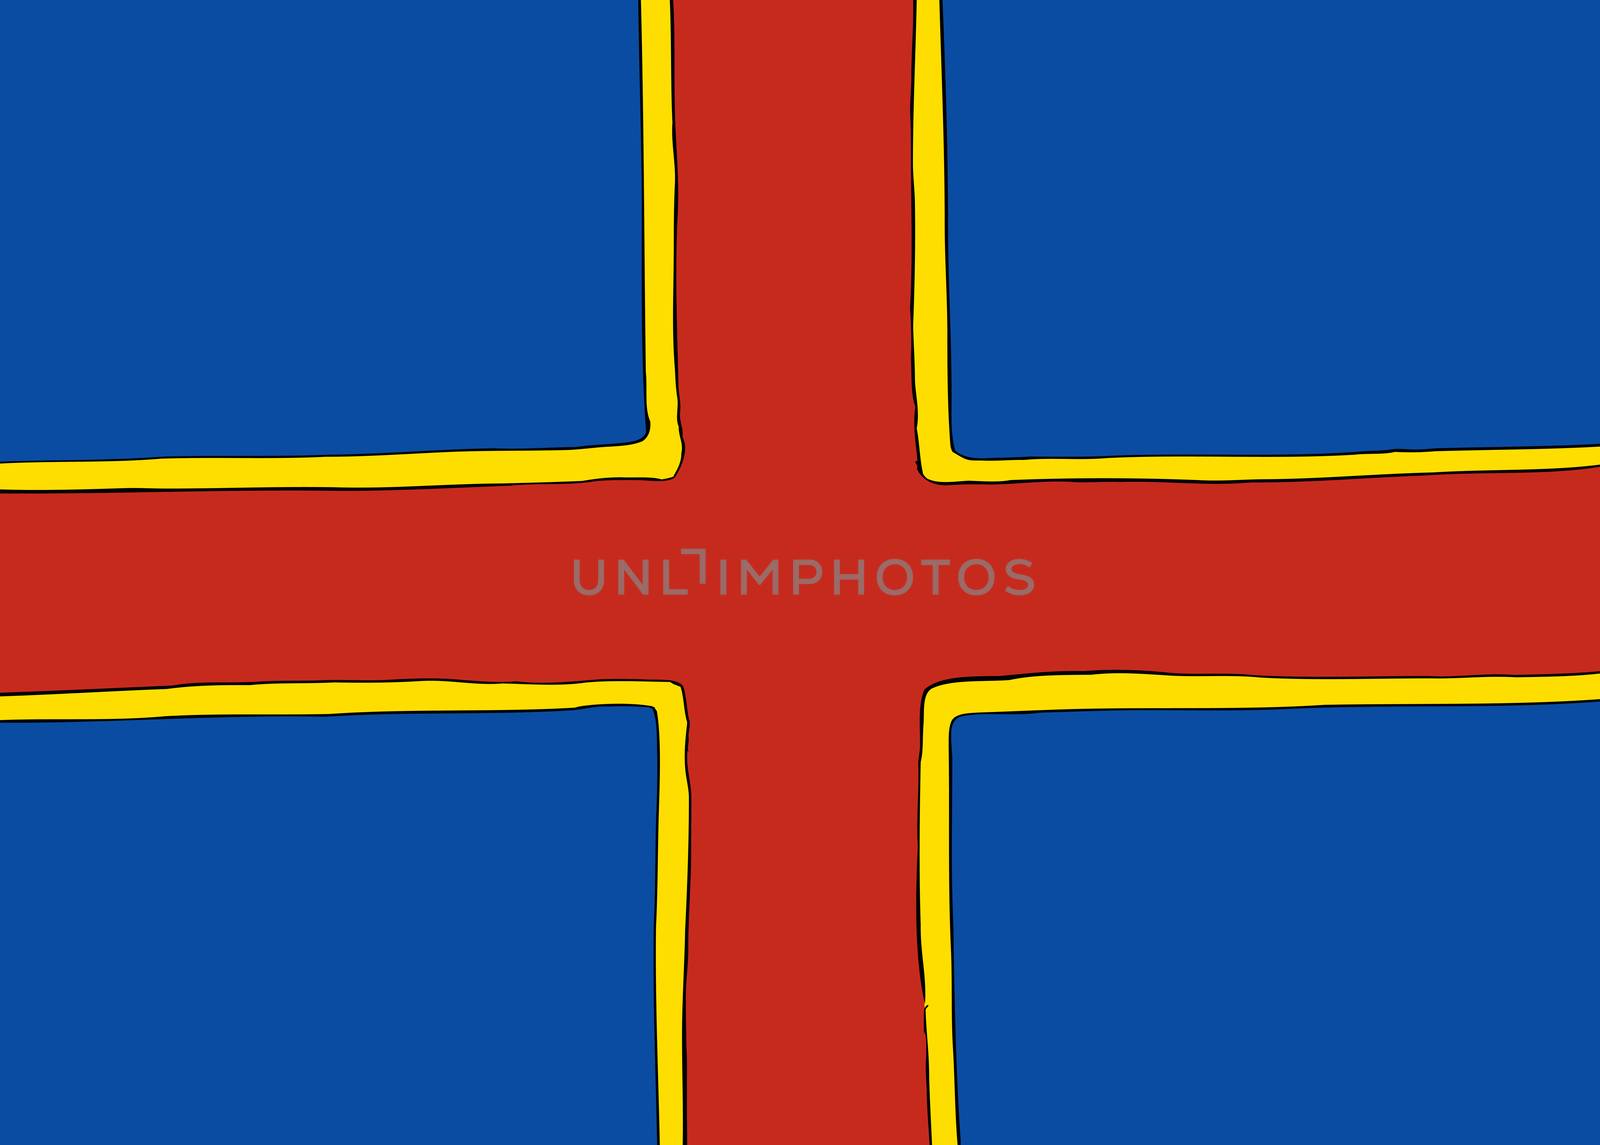 Symmetrical centered version of a Nordic Cross flag representing Ahvenanmaa